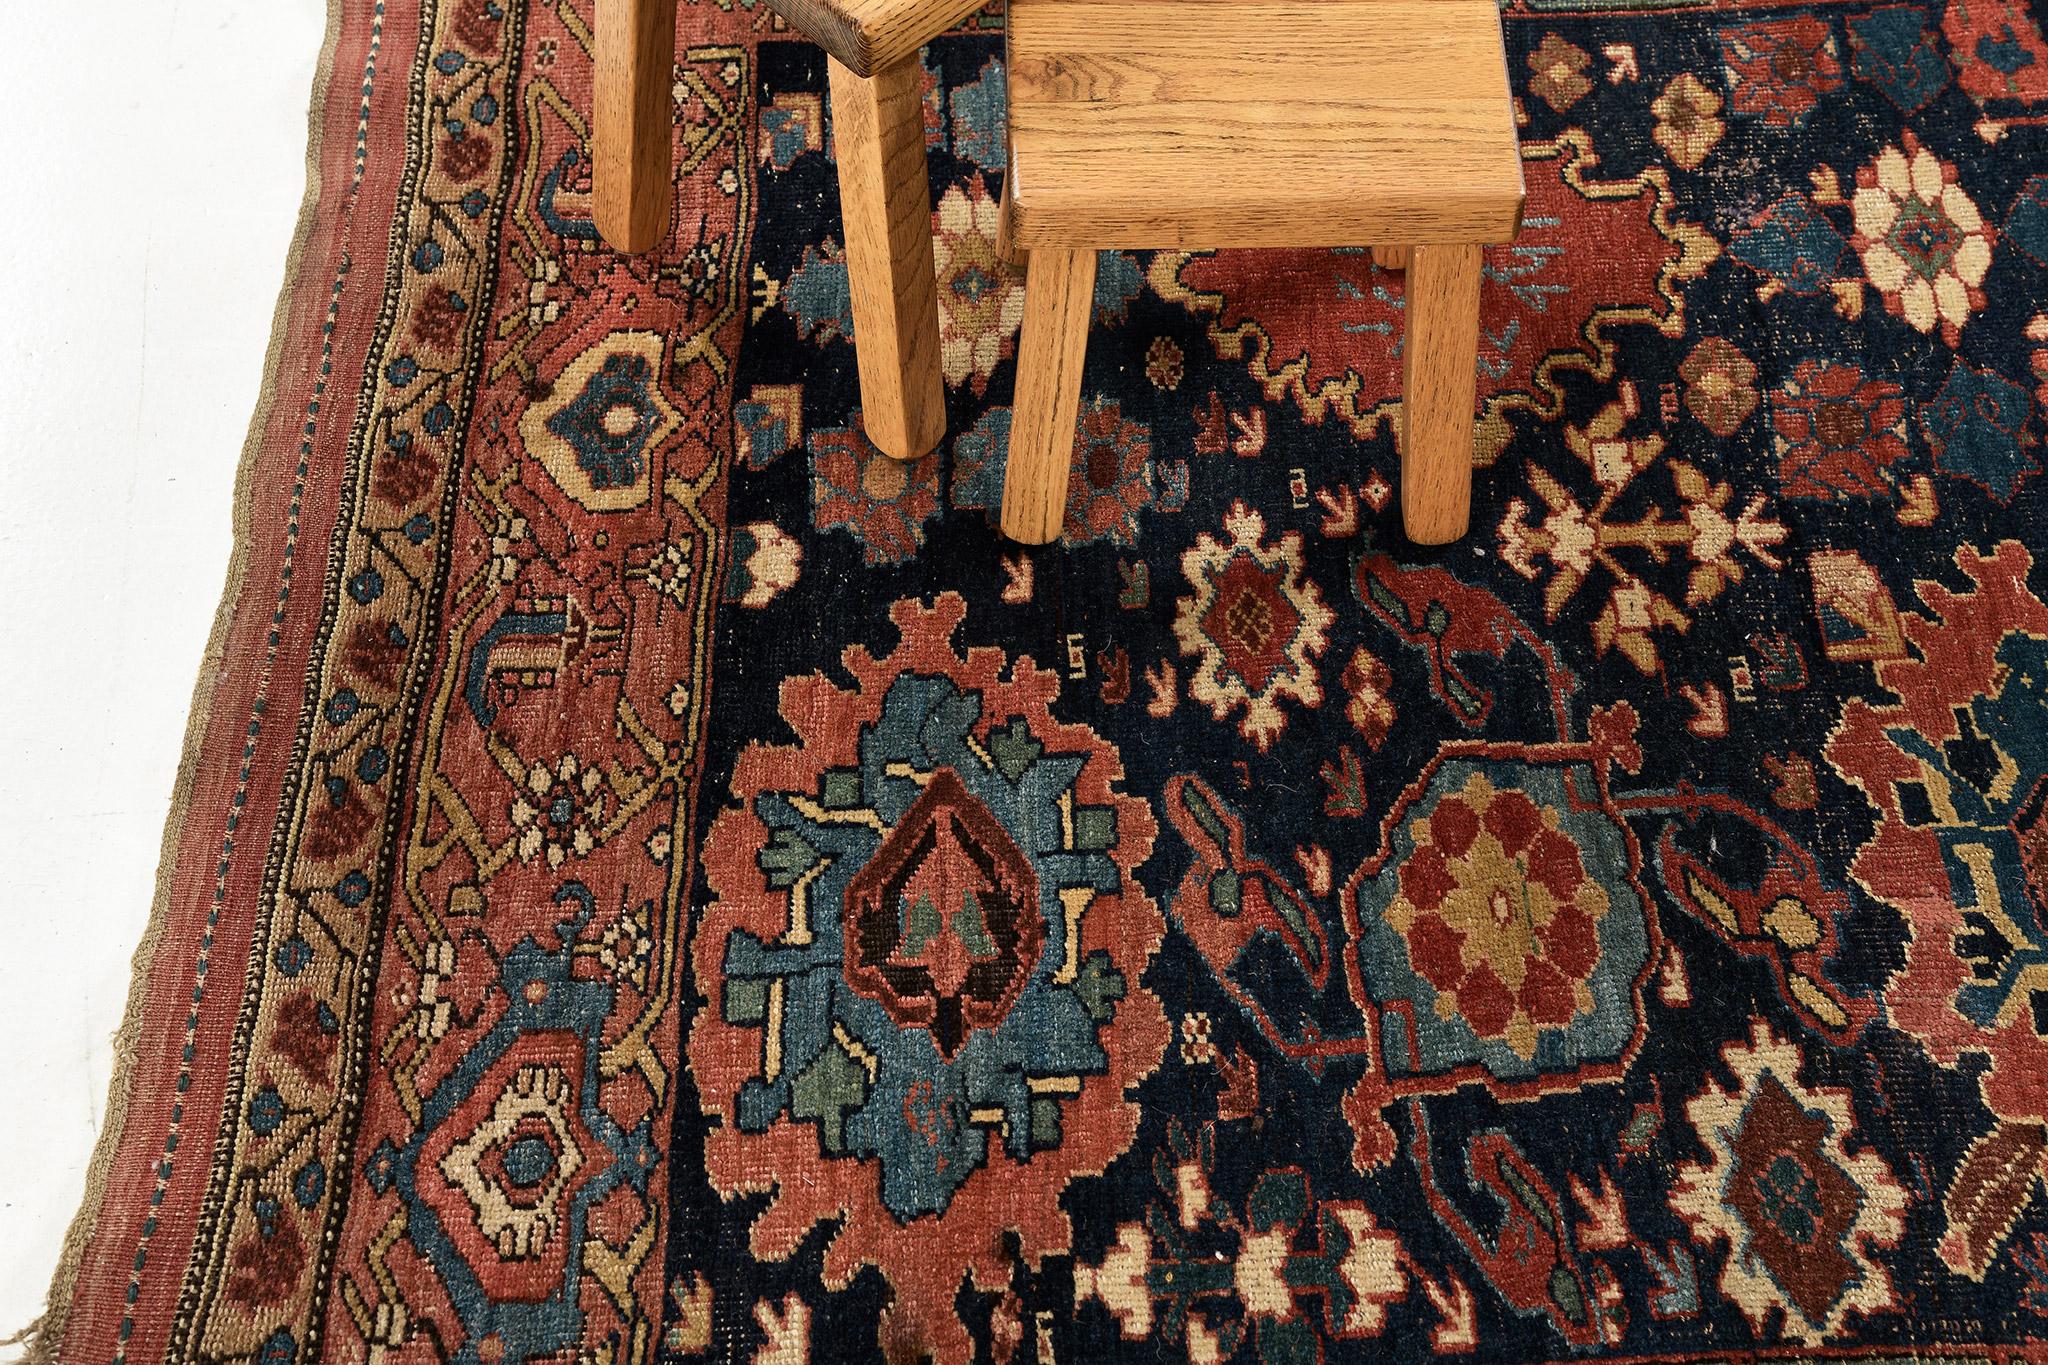 Our research dates this rug to the late 19th century. It is an authentic Persian Bidjar wool rug, with its origins from Persia, or modern day Iran. This is a very traditional design, but the square design can make any project un-traditional.

Rug